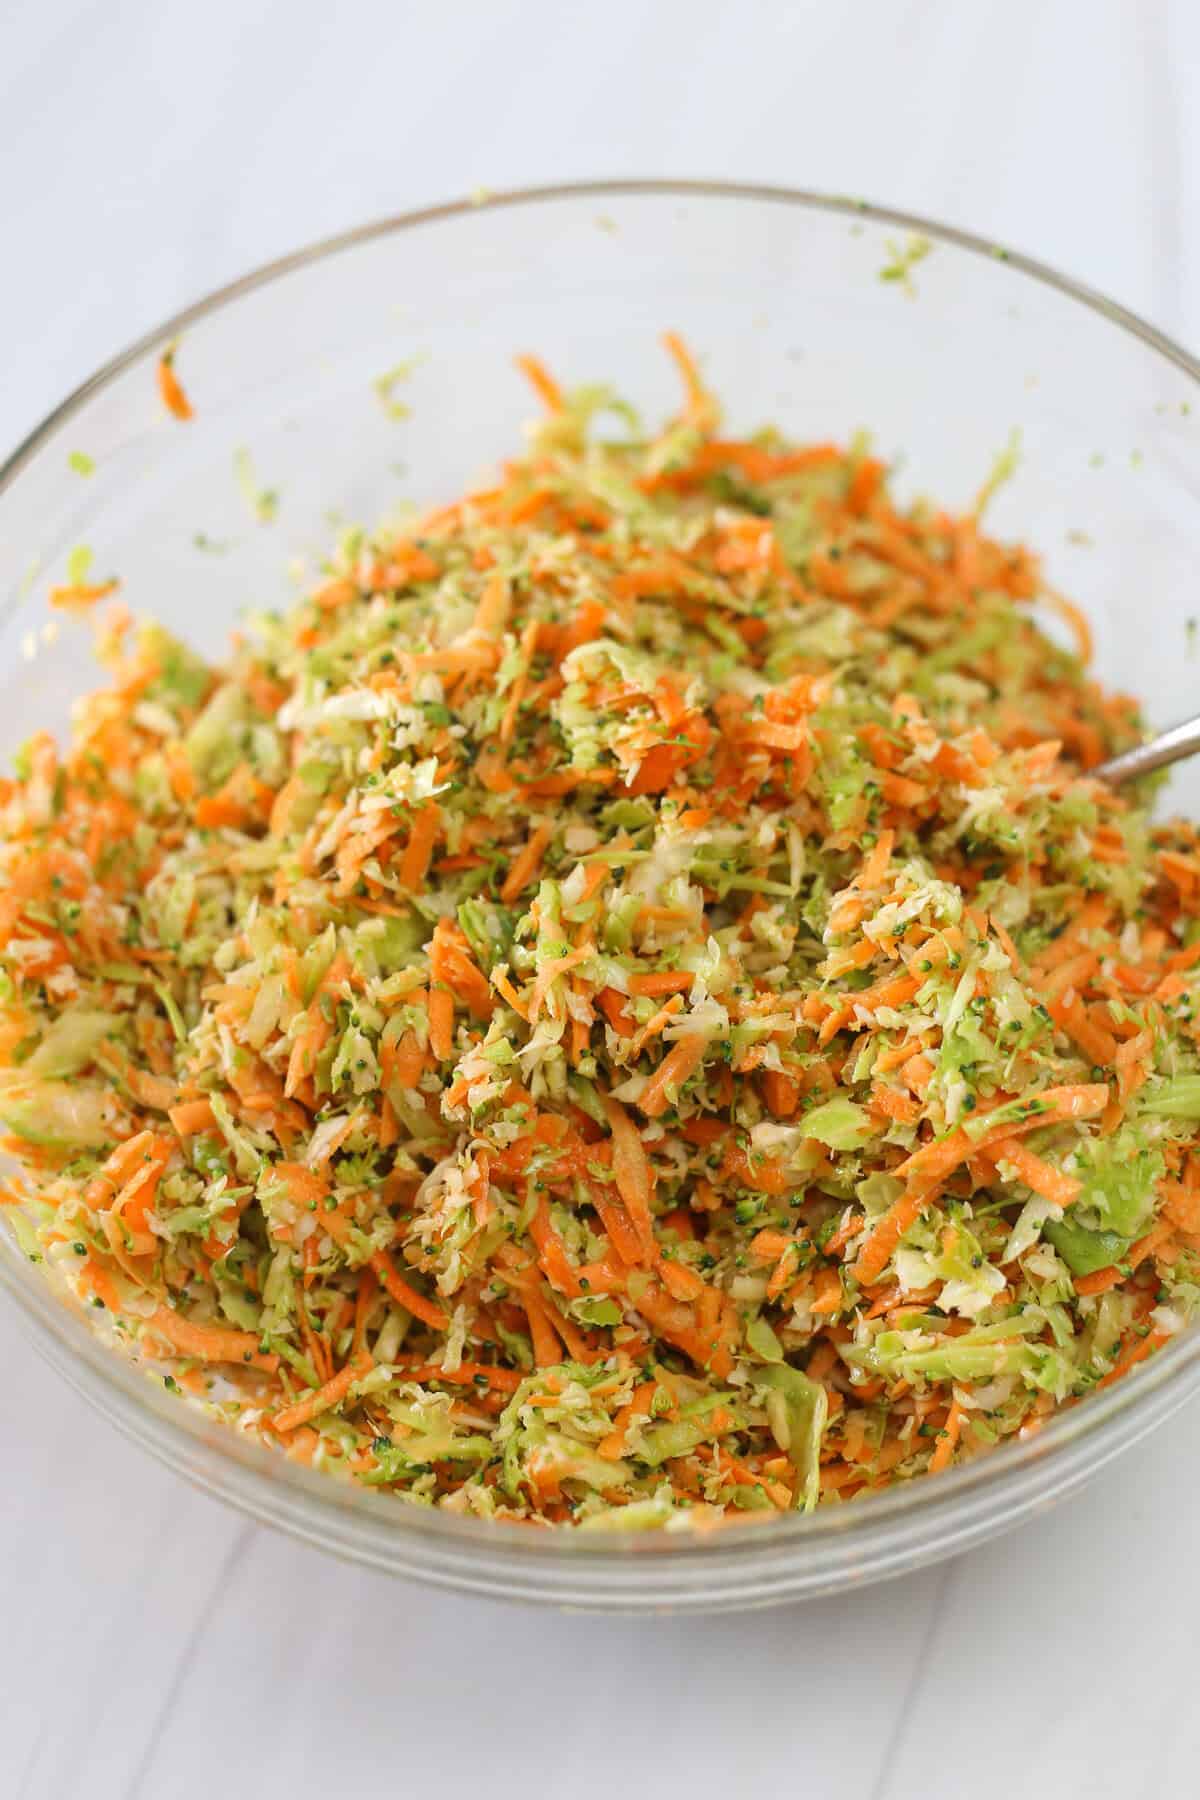 Shredded vegetables in a glass bowl being tossed with olive oil and salt & pepper.